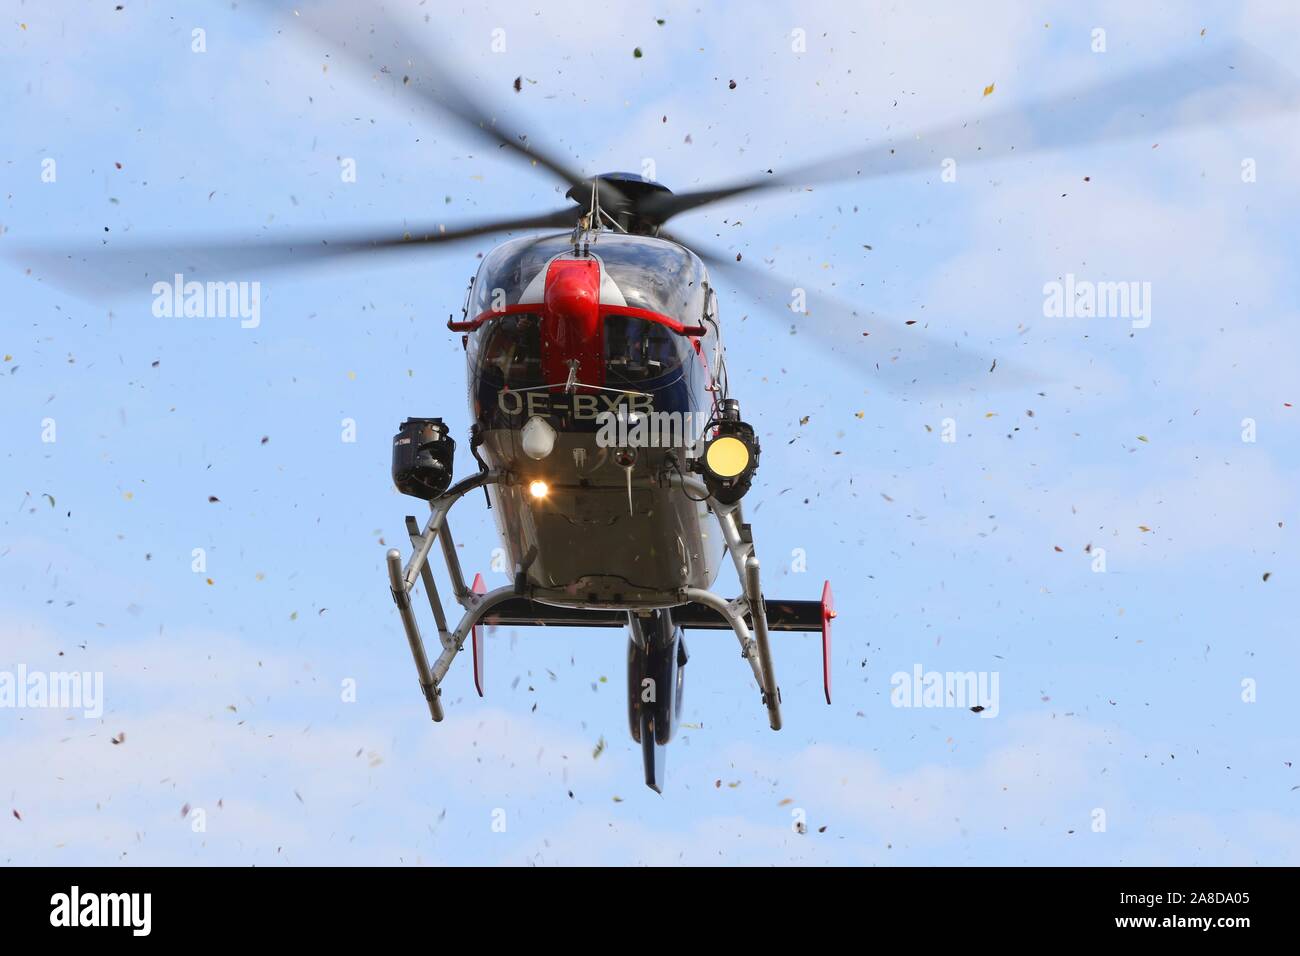 Police Helicopter landing in a storm Stock Photo